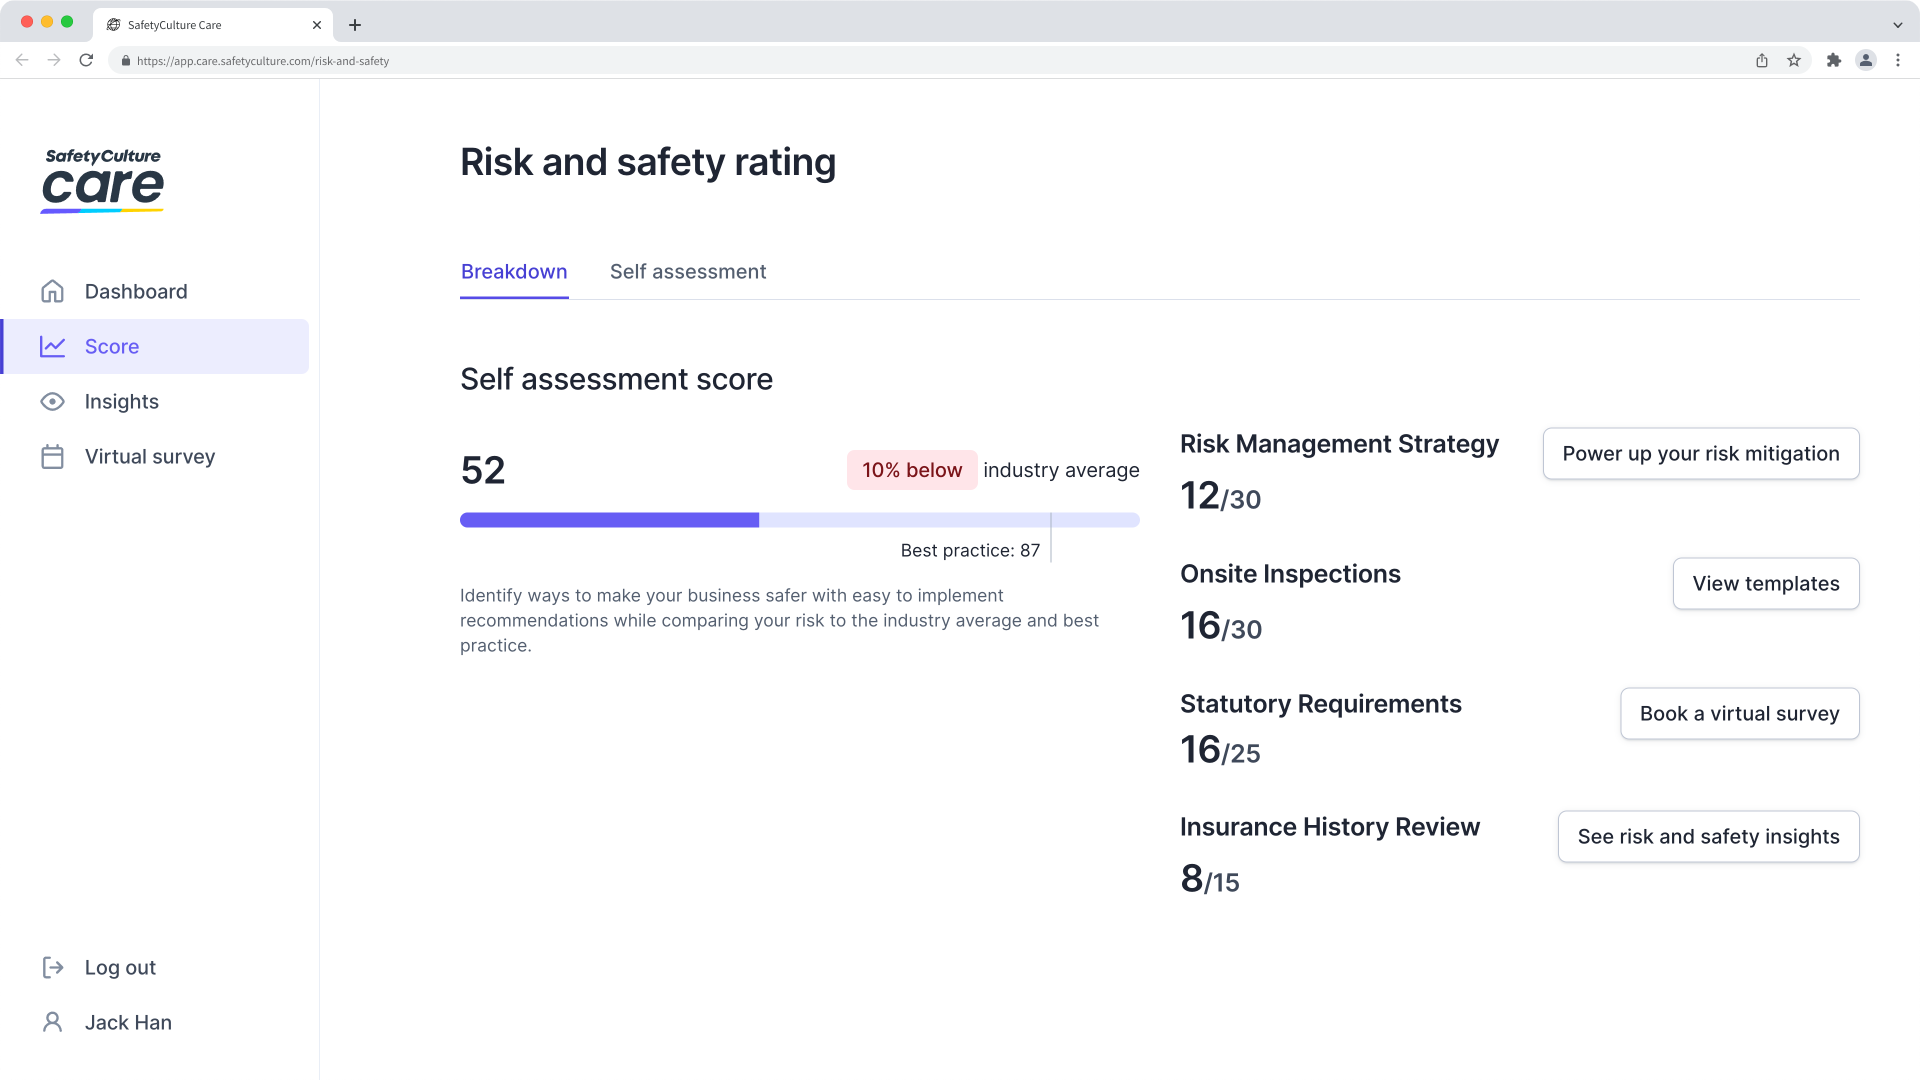 SafetyCulture Care: Risk and safety rating page.